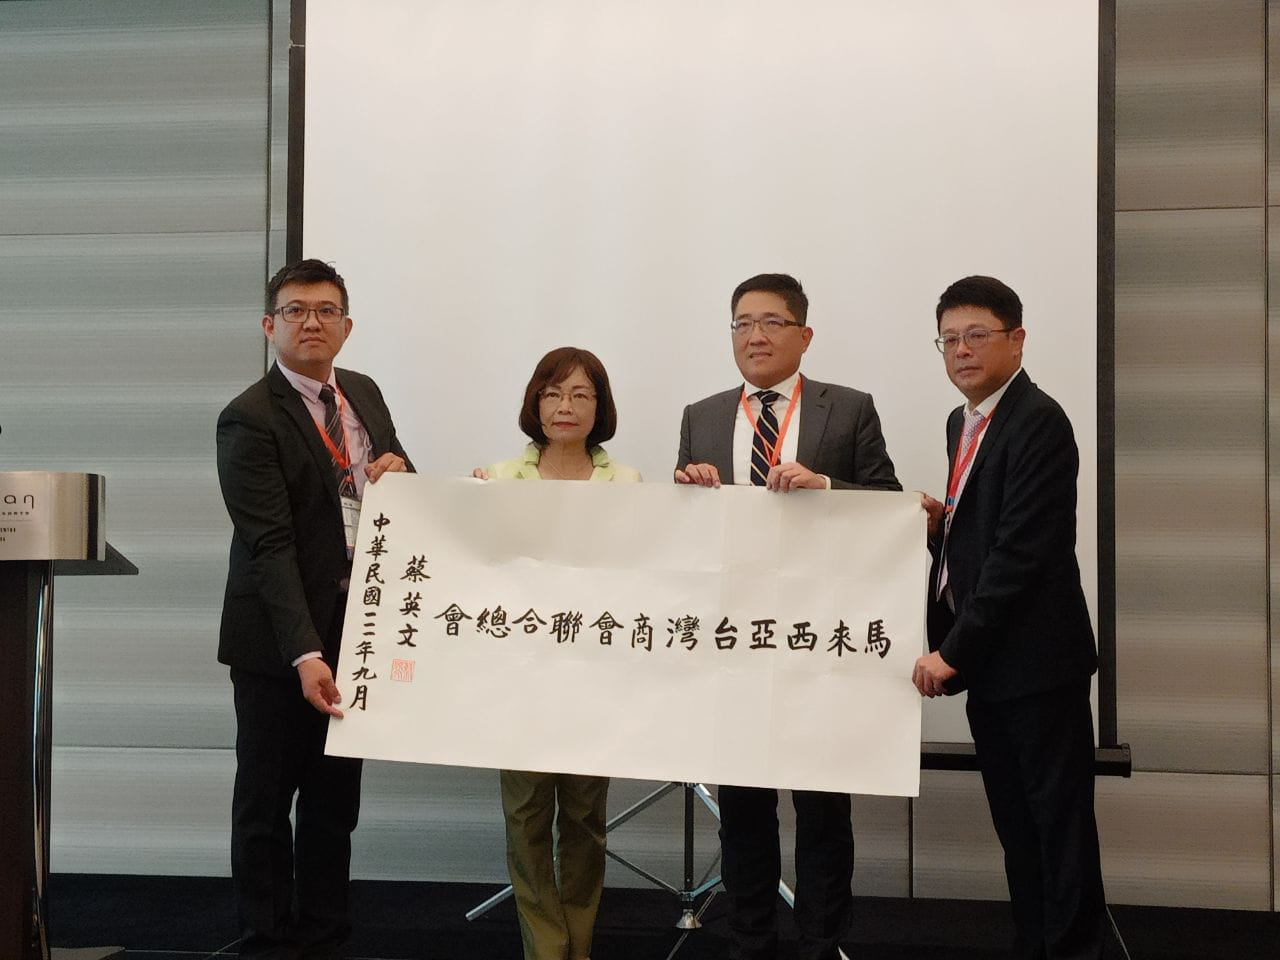 Representative Anne Hung presented the calligraphy on behalf of President Tsai Ing-wen